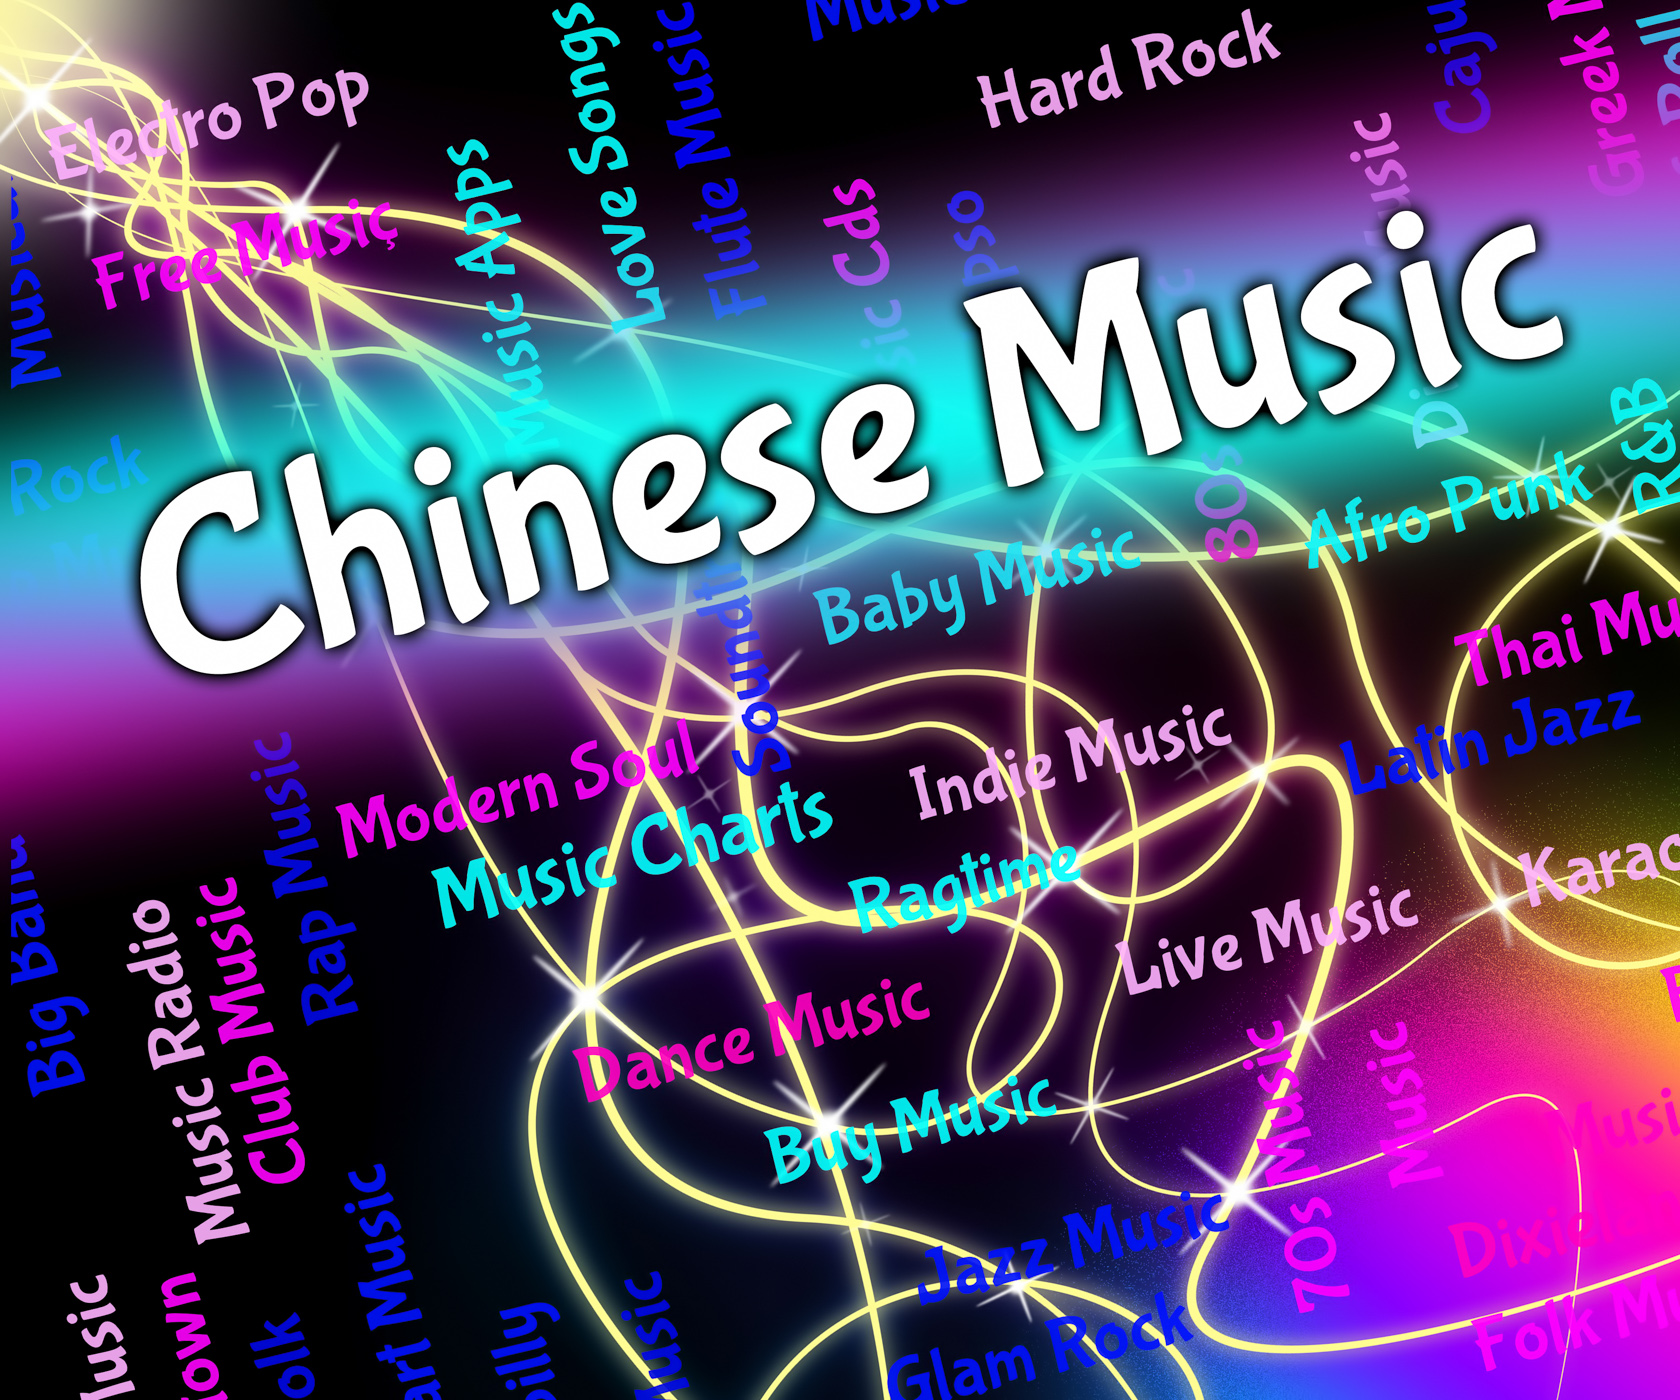 Chinese music means sound track and asian photo